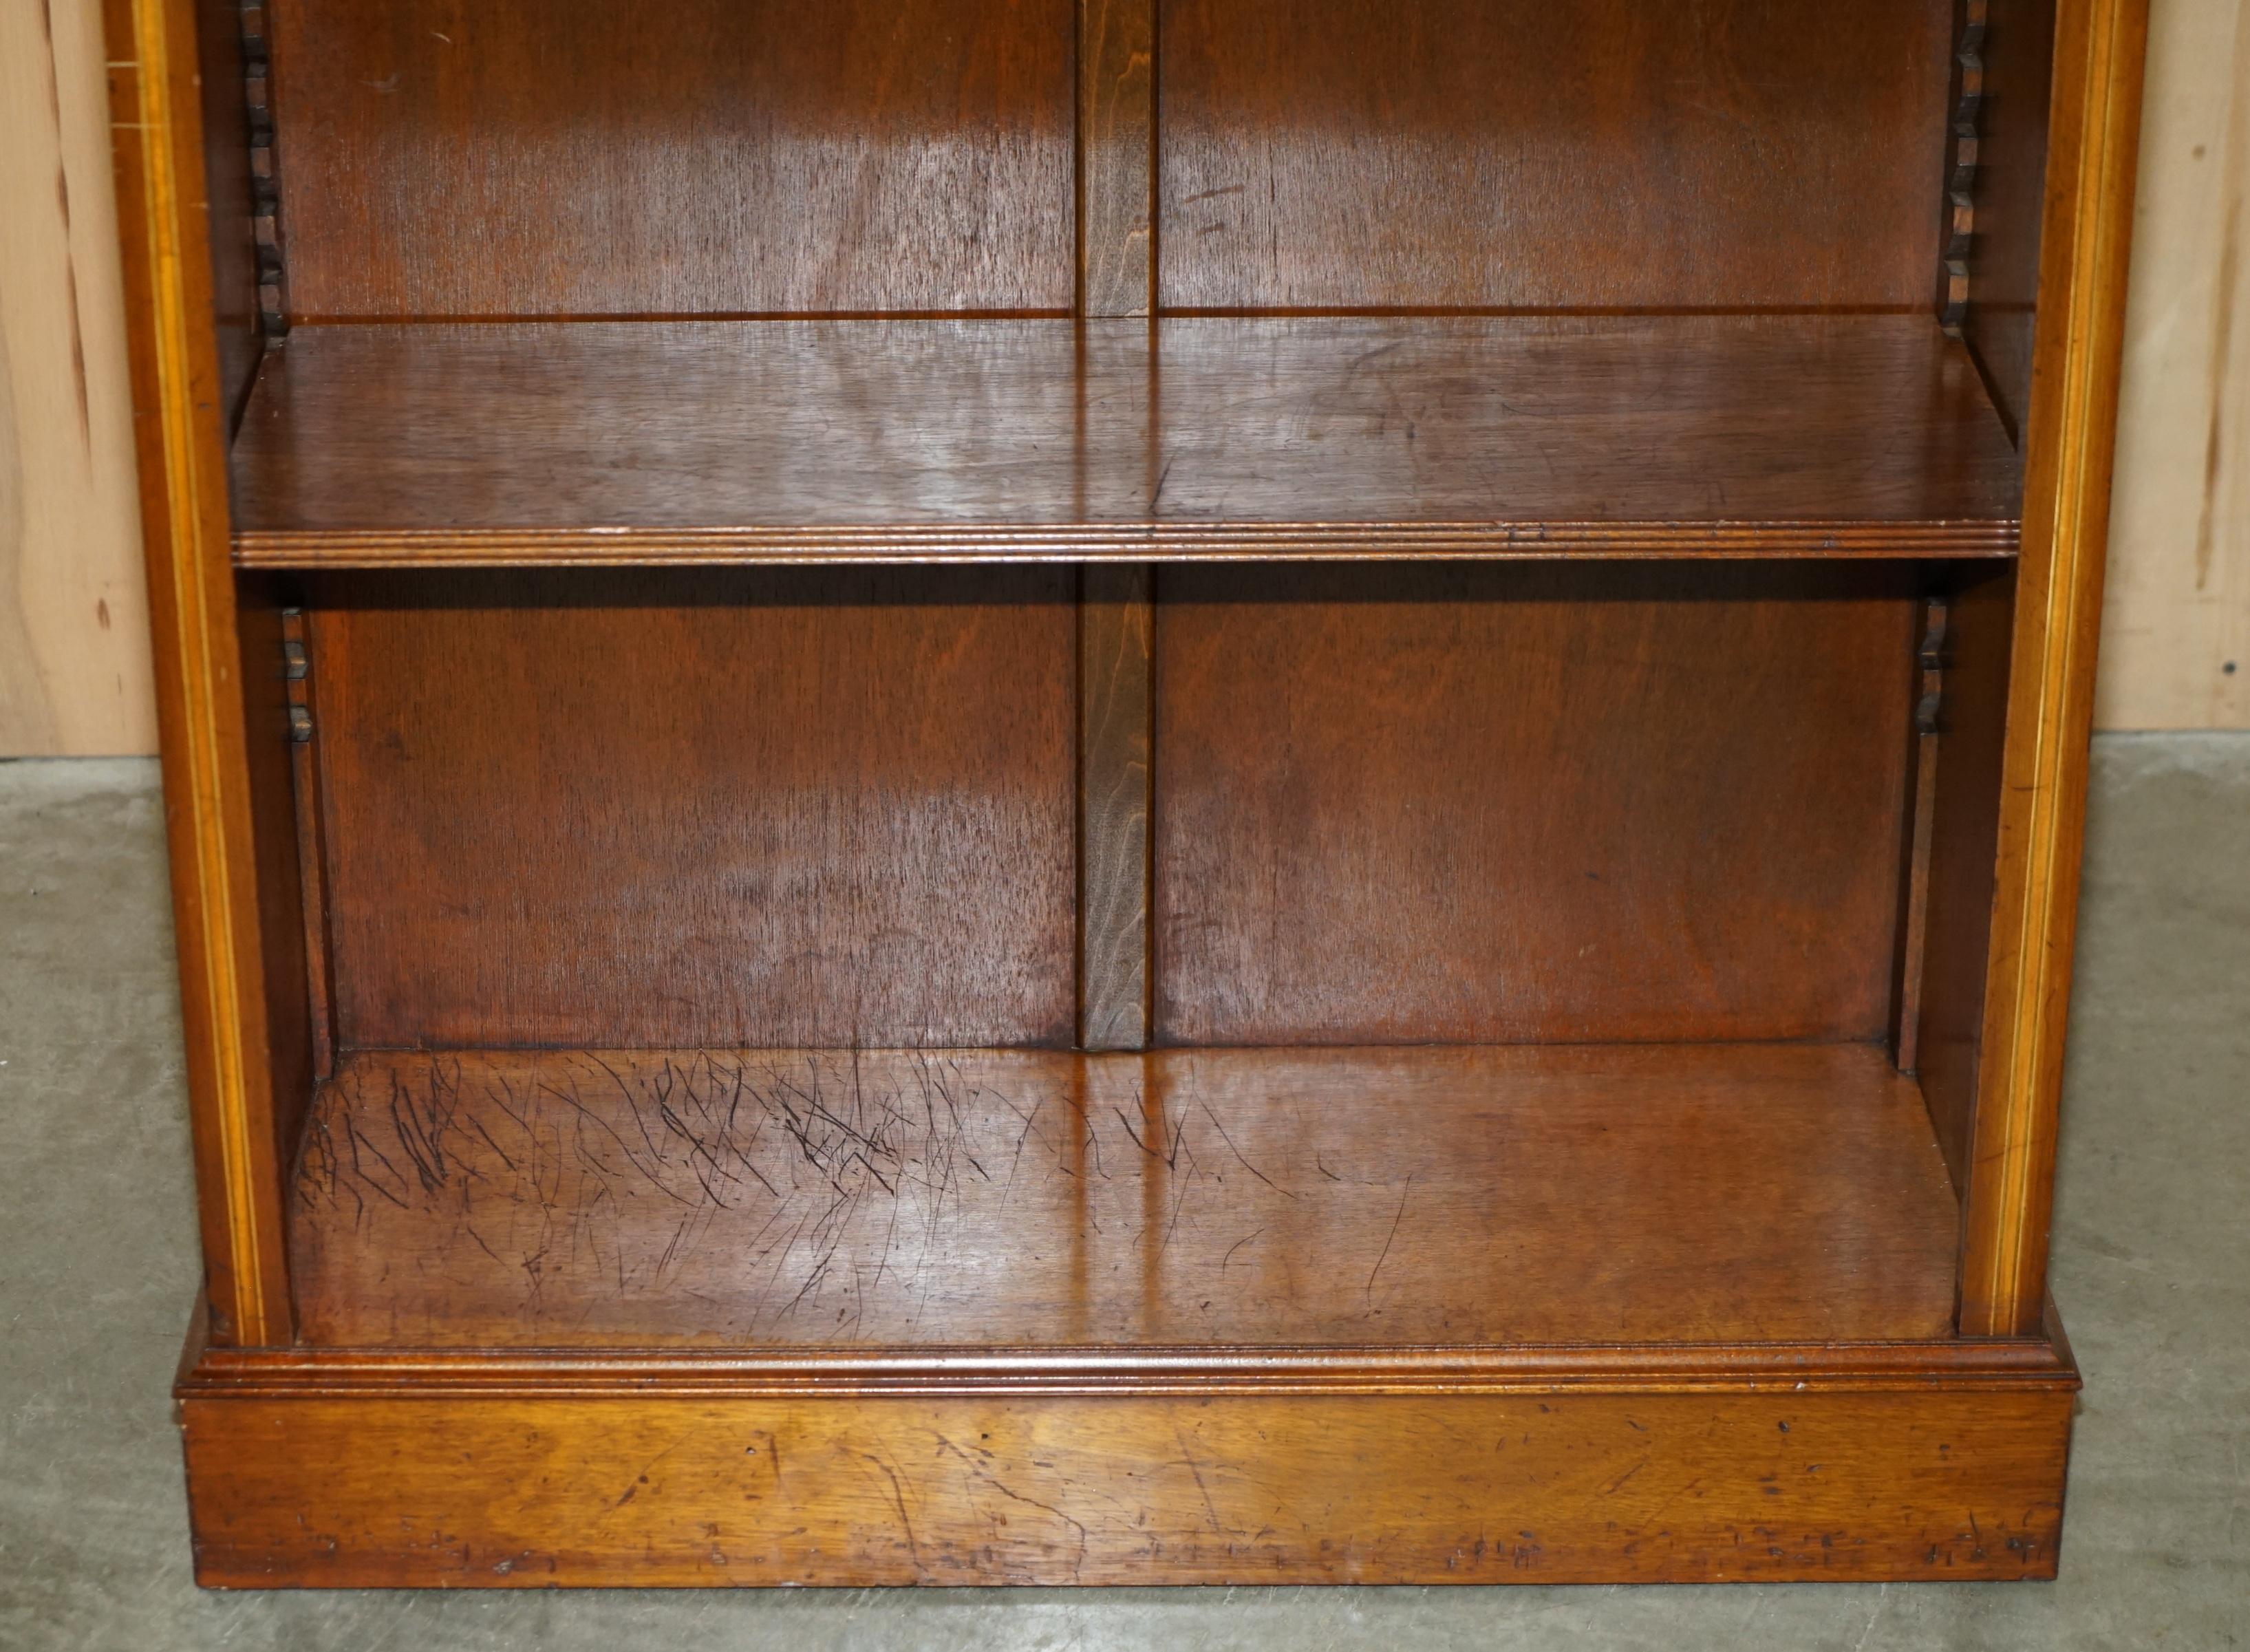 20th Century EXQUISITELY INLAID BRiGHTS OF NETTLEBED SHERATON REVIVAL DWARF OPEN BOOKCASE For Sale